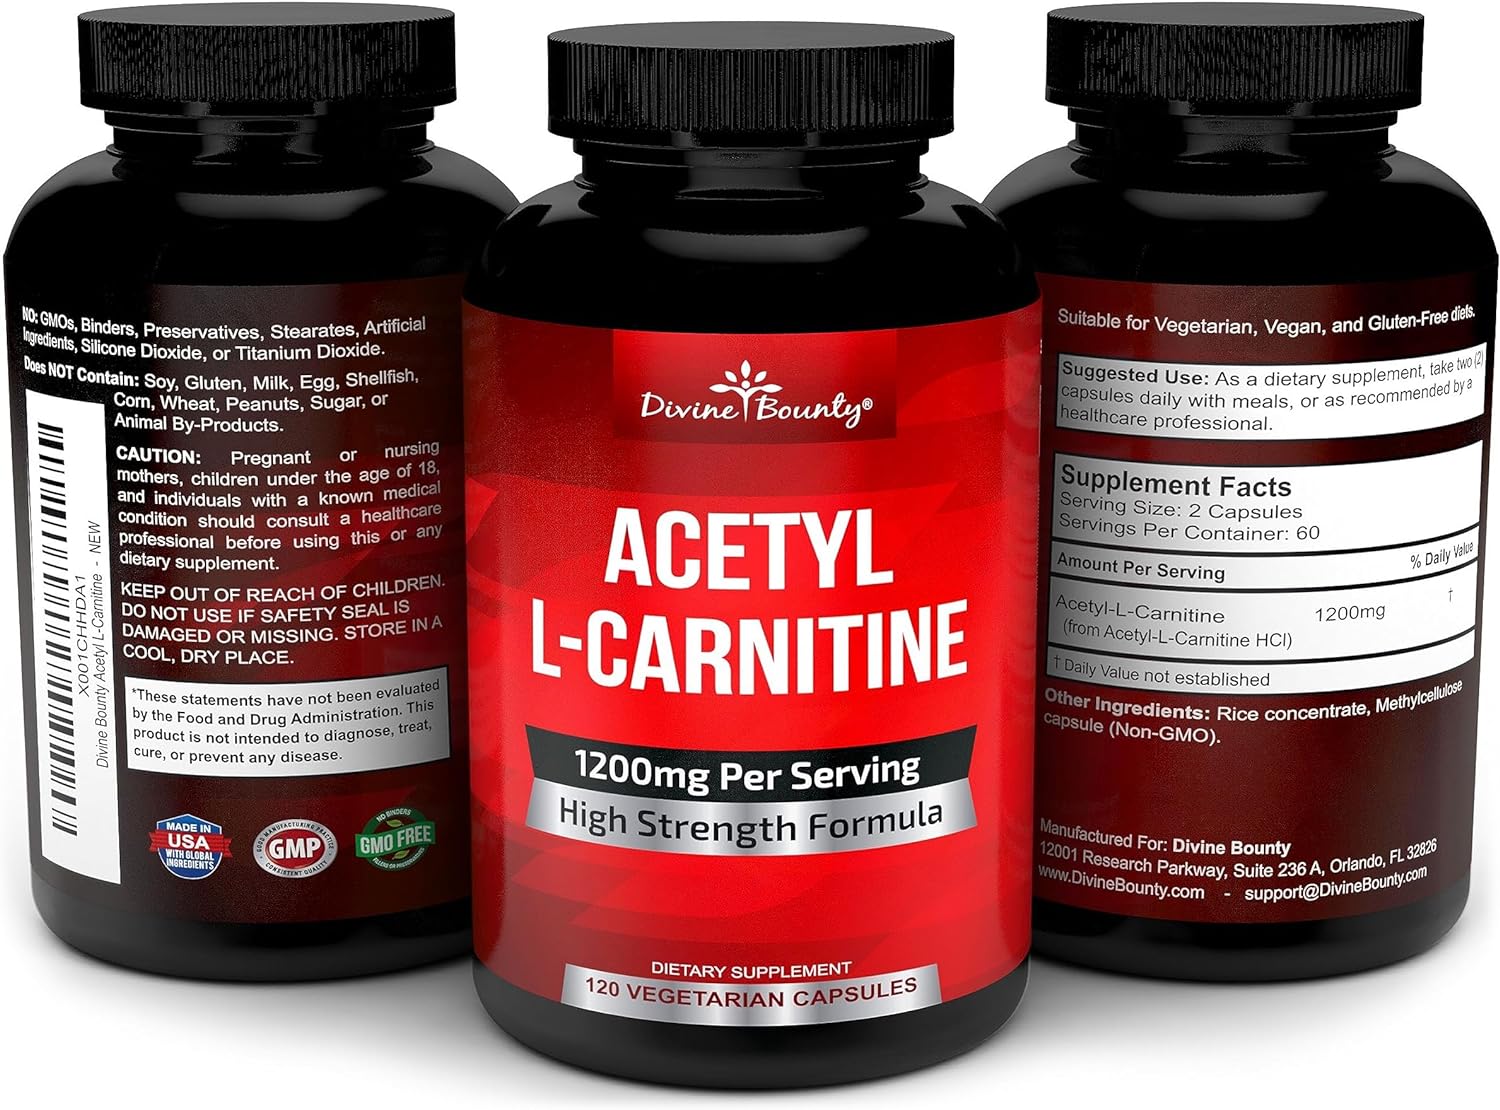 Divine Bounty Acetyl L-Carnitine Capsules 1200mg Per Serving - L Carnitine Supplement 120 Vegetarian Capsules : Health & Household